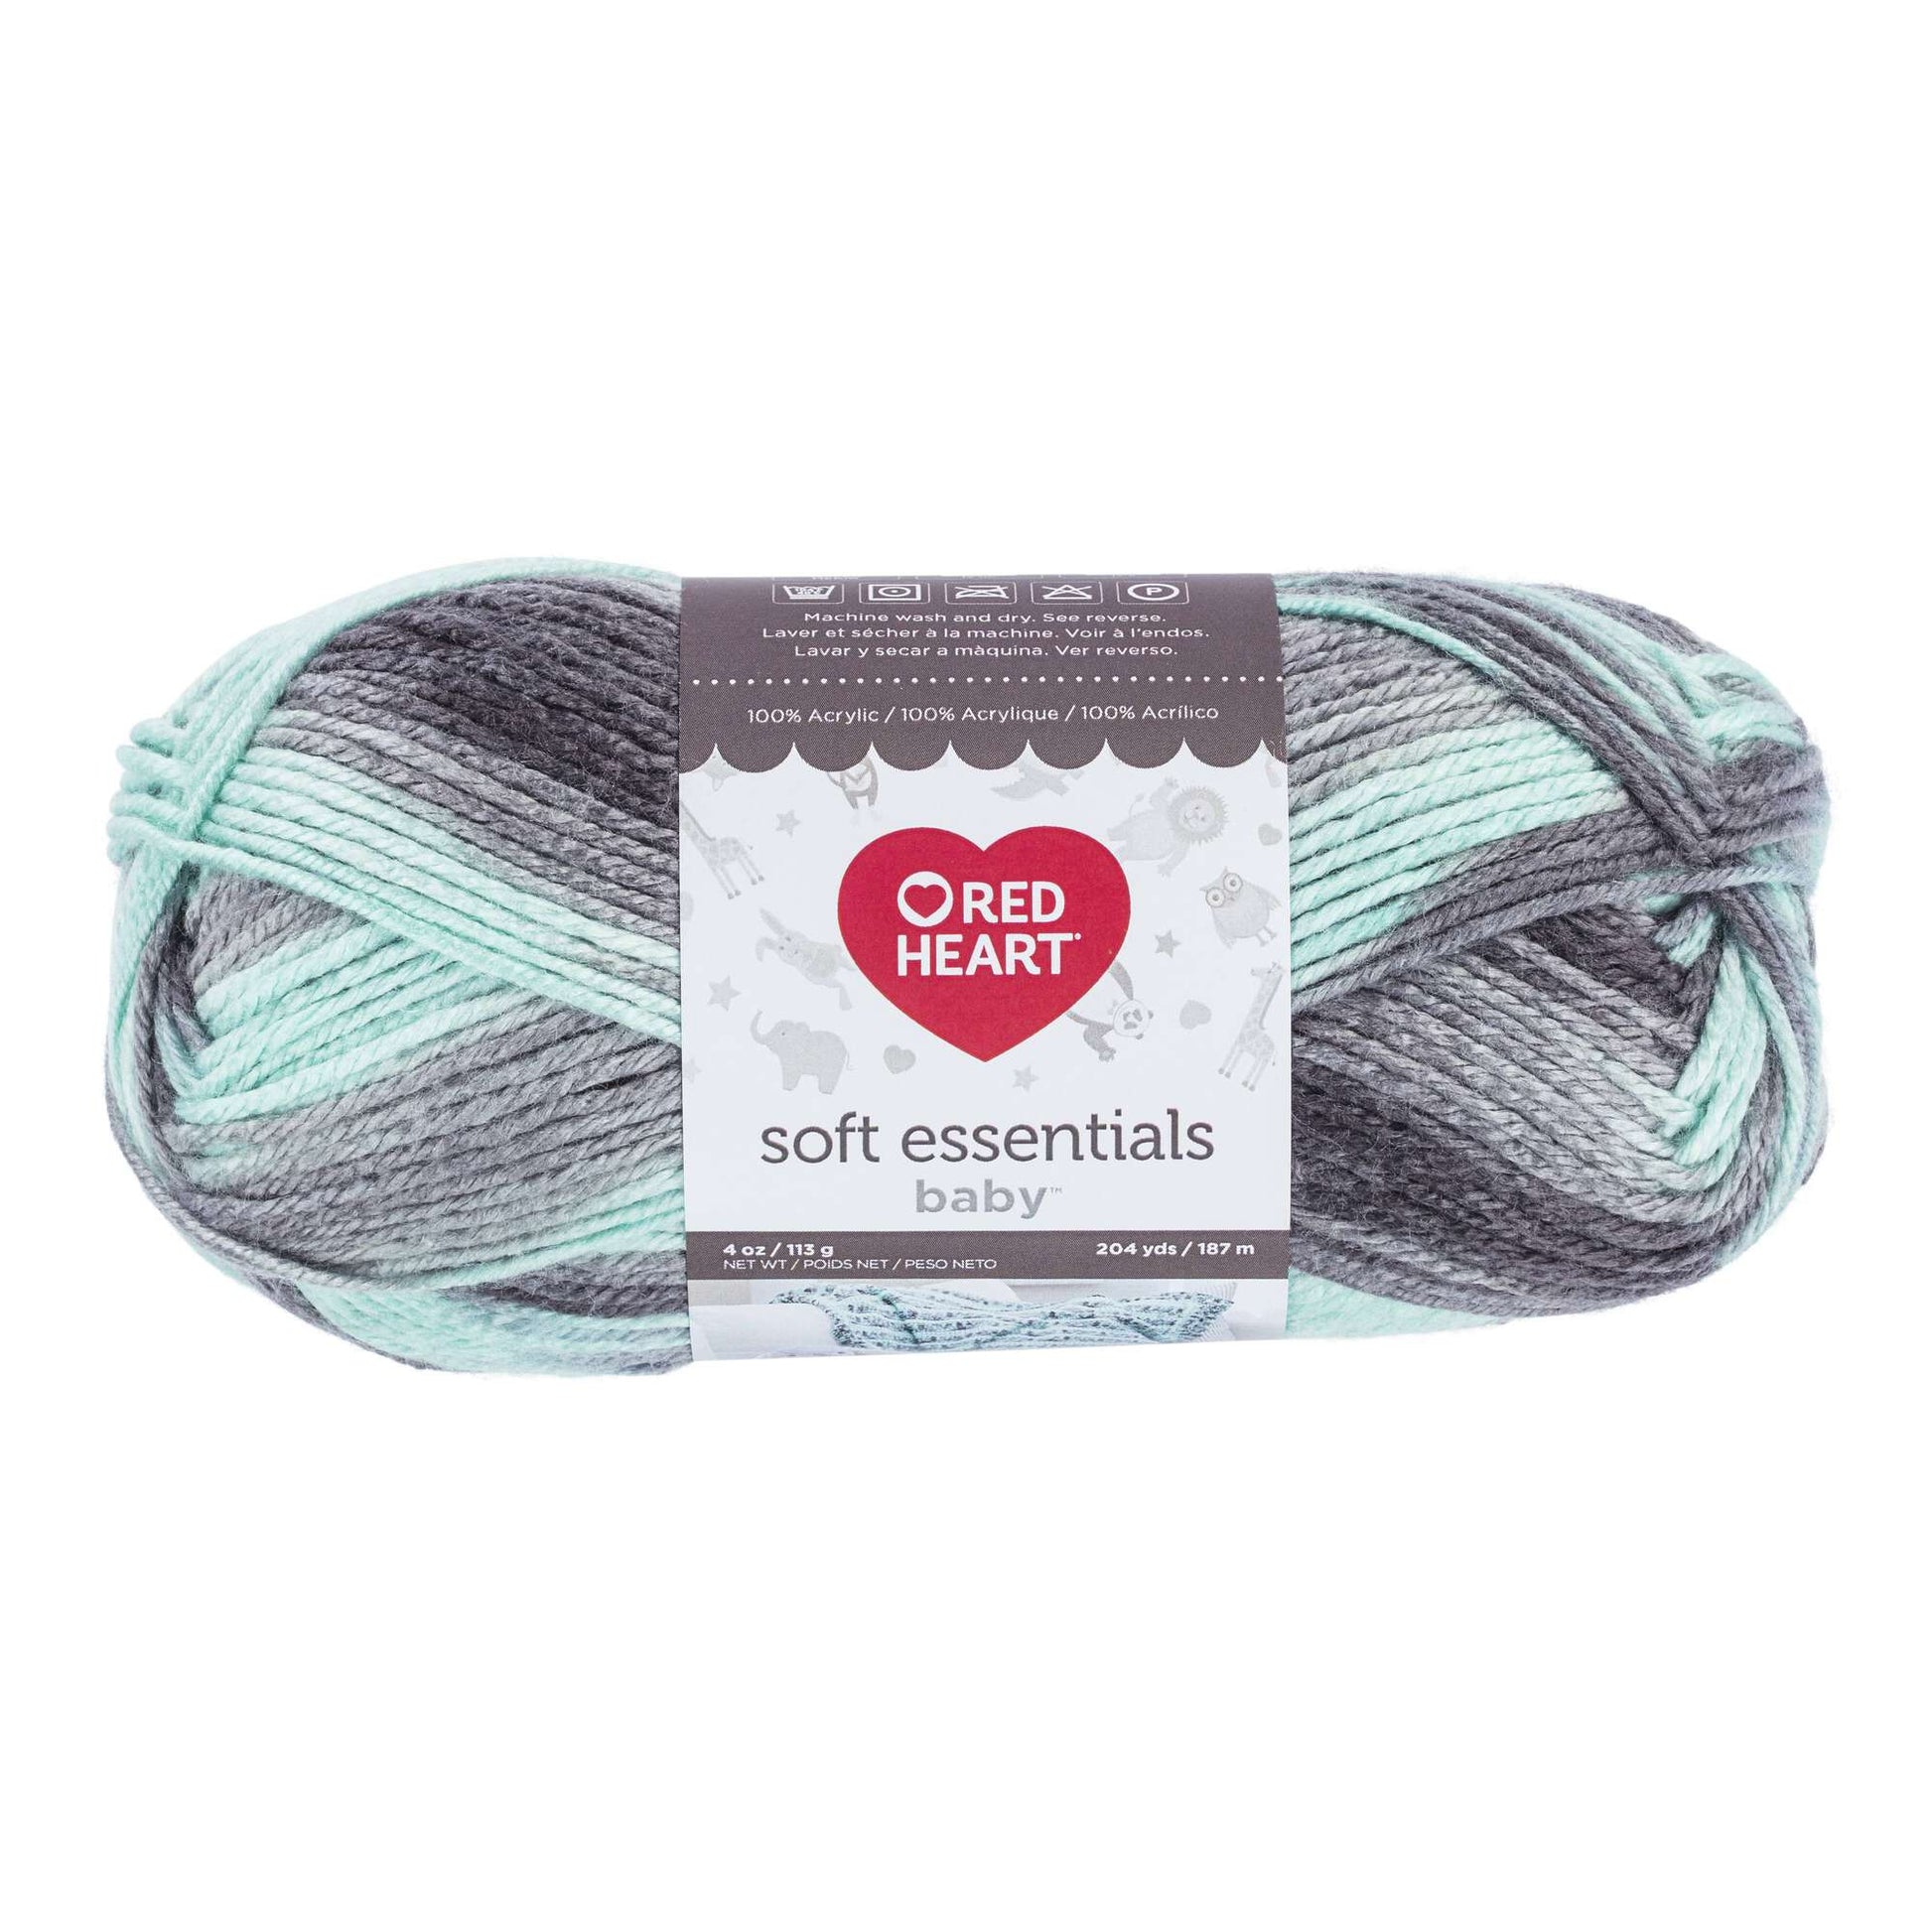 Red Heart Soft Essentials Baby Yarn - Discontinued shades